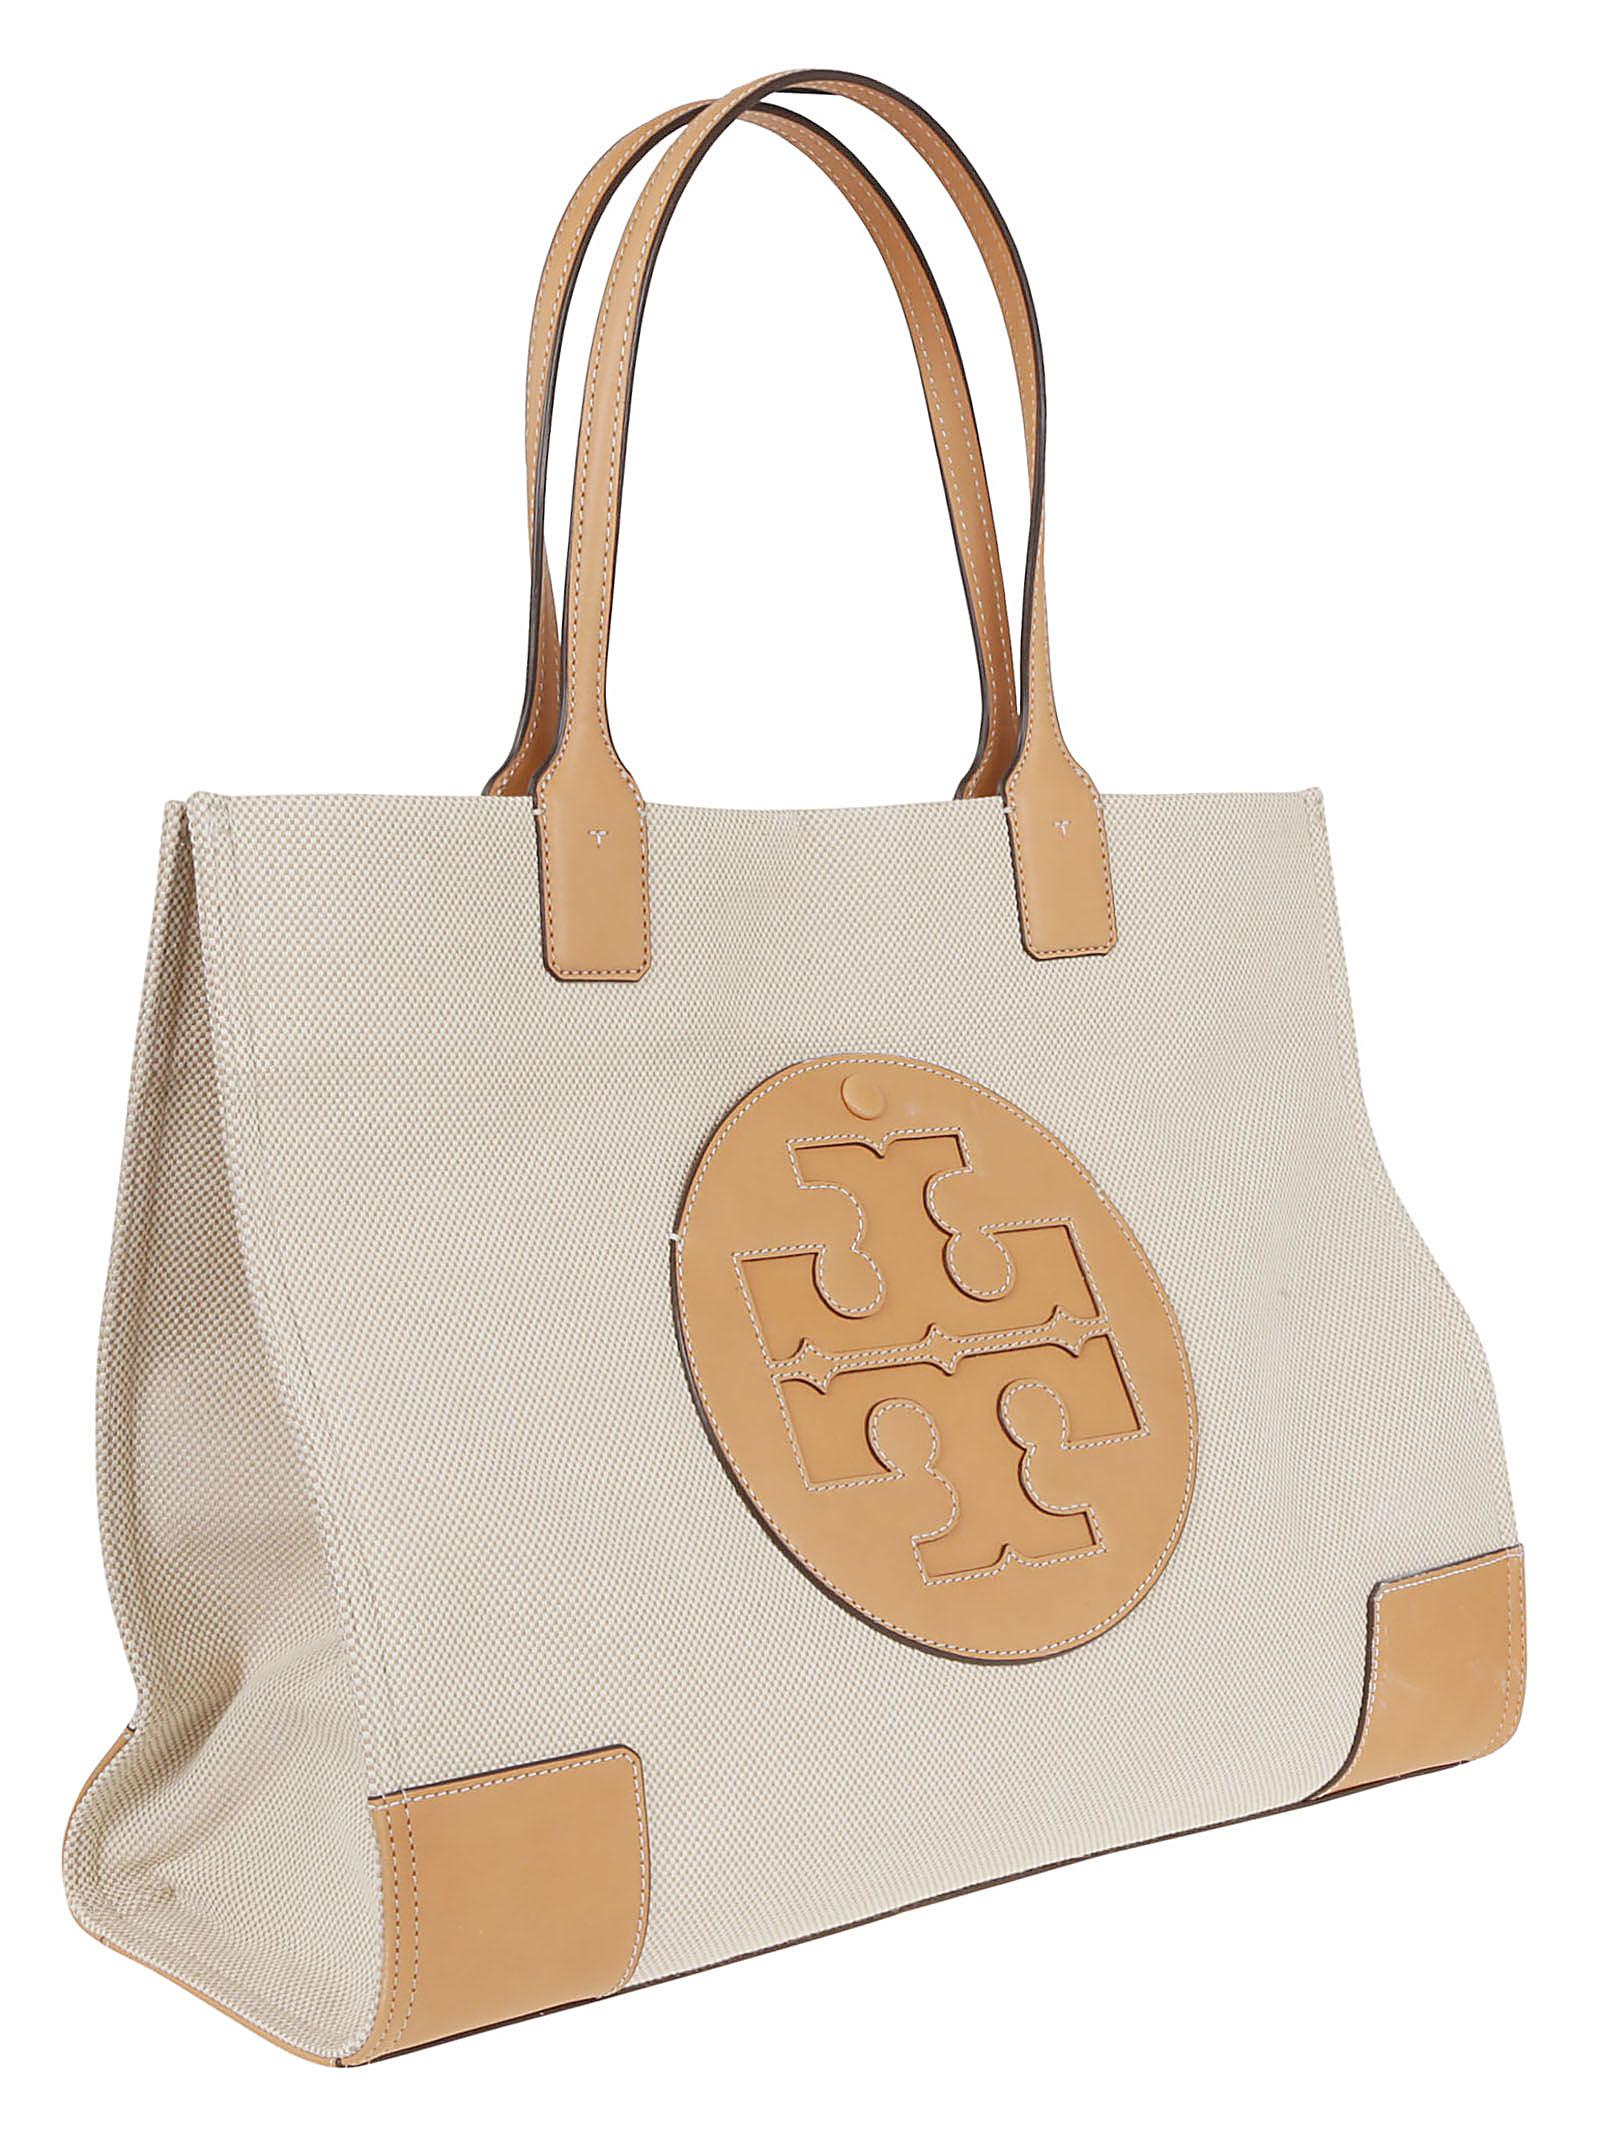 Tory Burch Ella Canvas Tote in Natural / Ivory (Natural) - Lyst